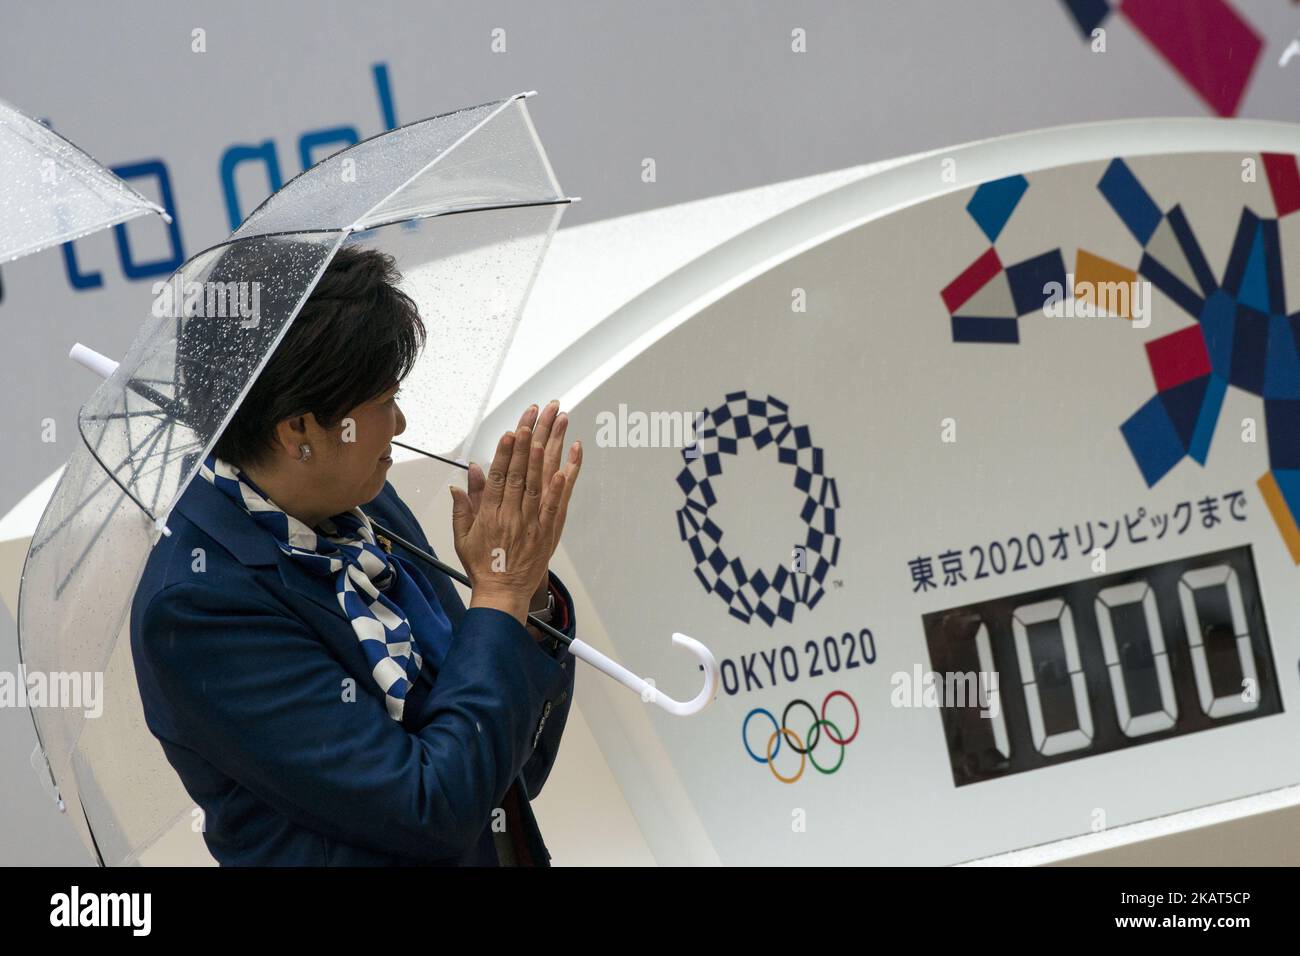 Tokyo Governor and head of Party of Hope Yuriko Koike claps her hands as she attend an unveiling the display counting down the days to the beginning of the 2020 Tokyo Olympic Games, at the the countdown ceremony to mark 1,000 days until the 2020 Tokyo Olympic Games in Tokyo, Japan October 28, 2017. (Photo by Alessandro Di Ciommo/NurPhoto) Stock Photo